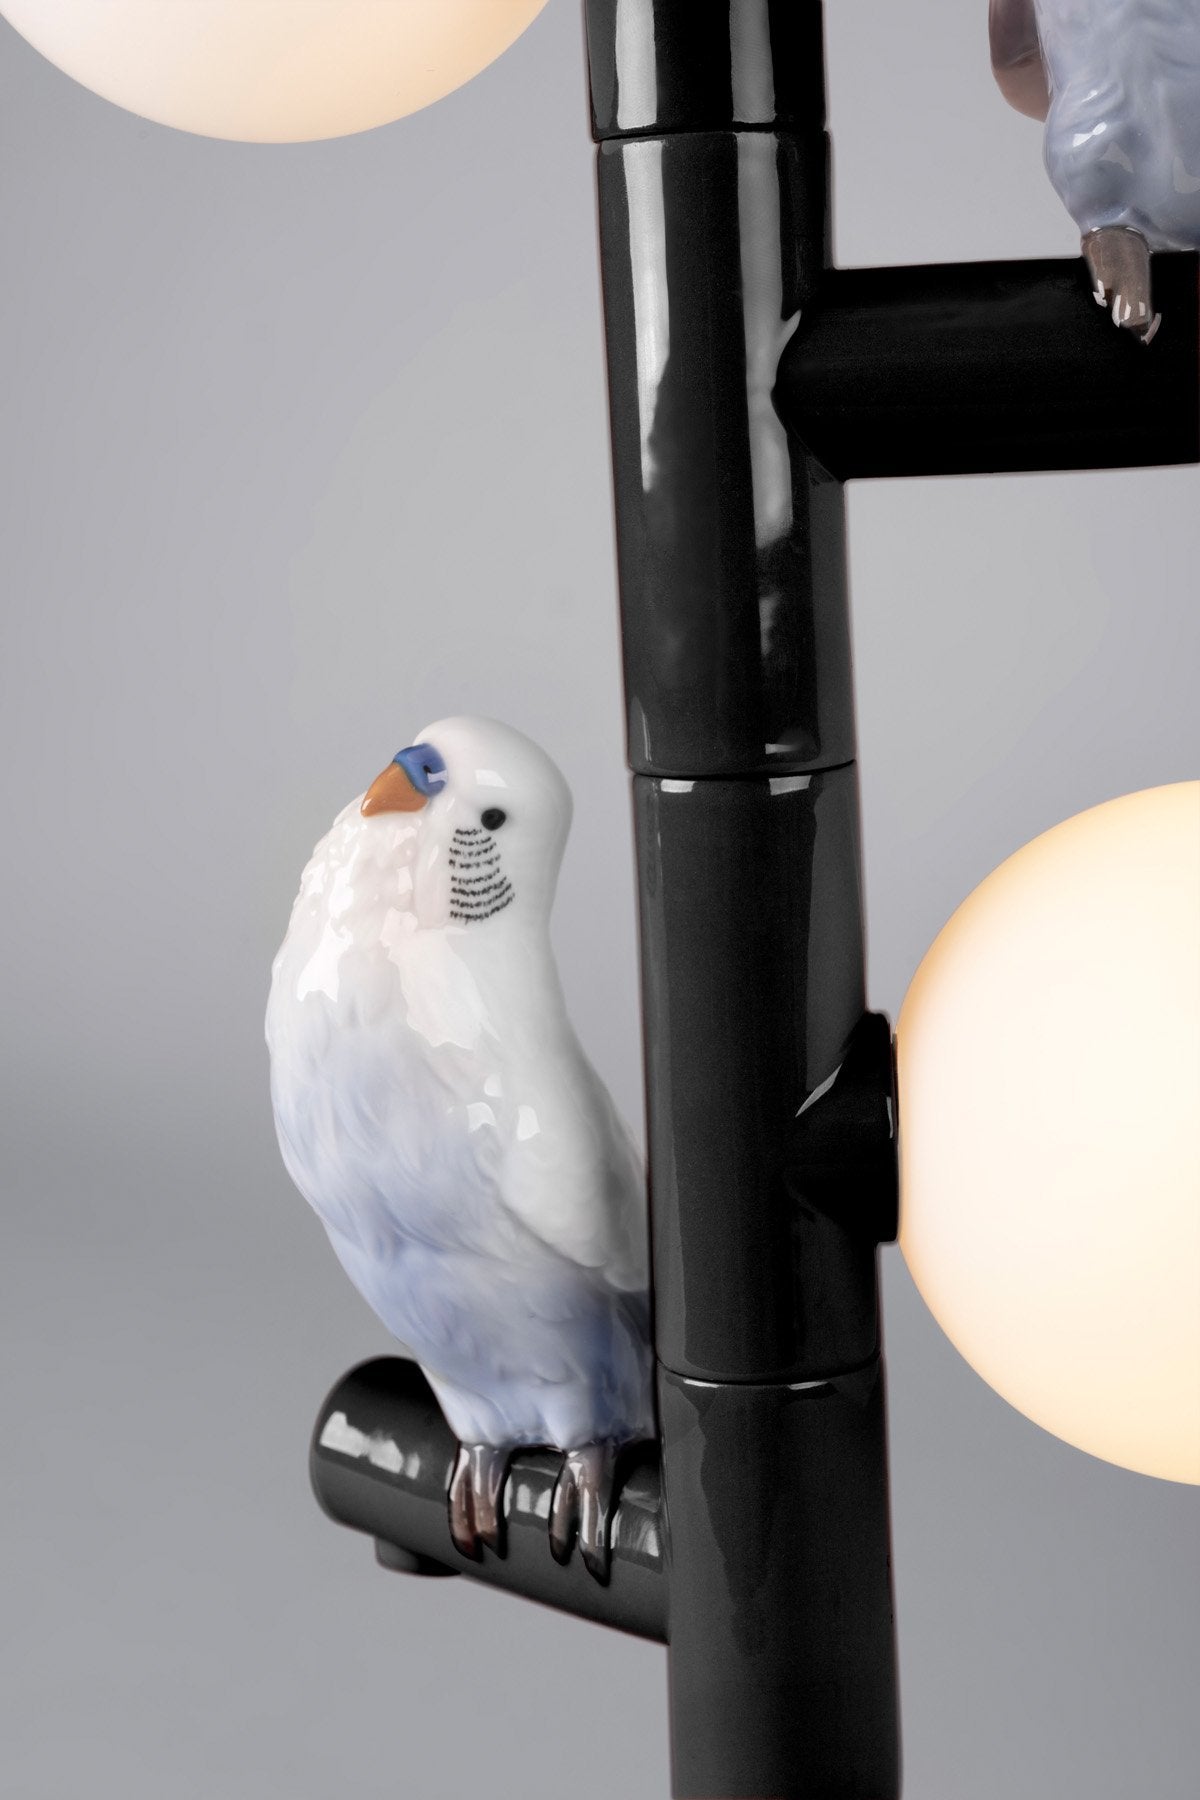 Parrot Party Table Lamp in Black - FormFluent